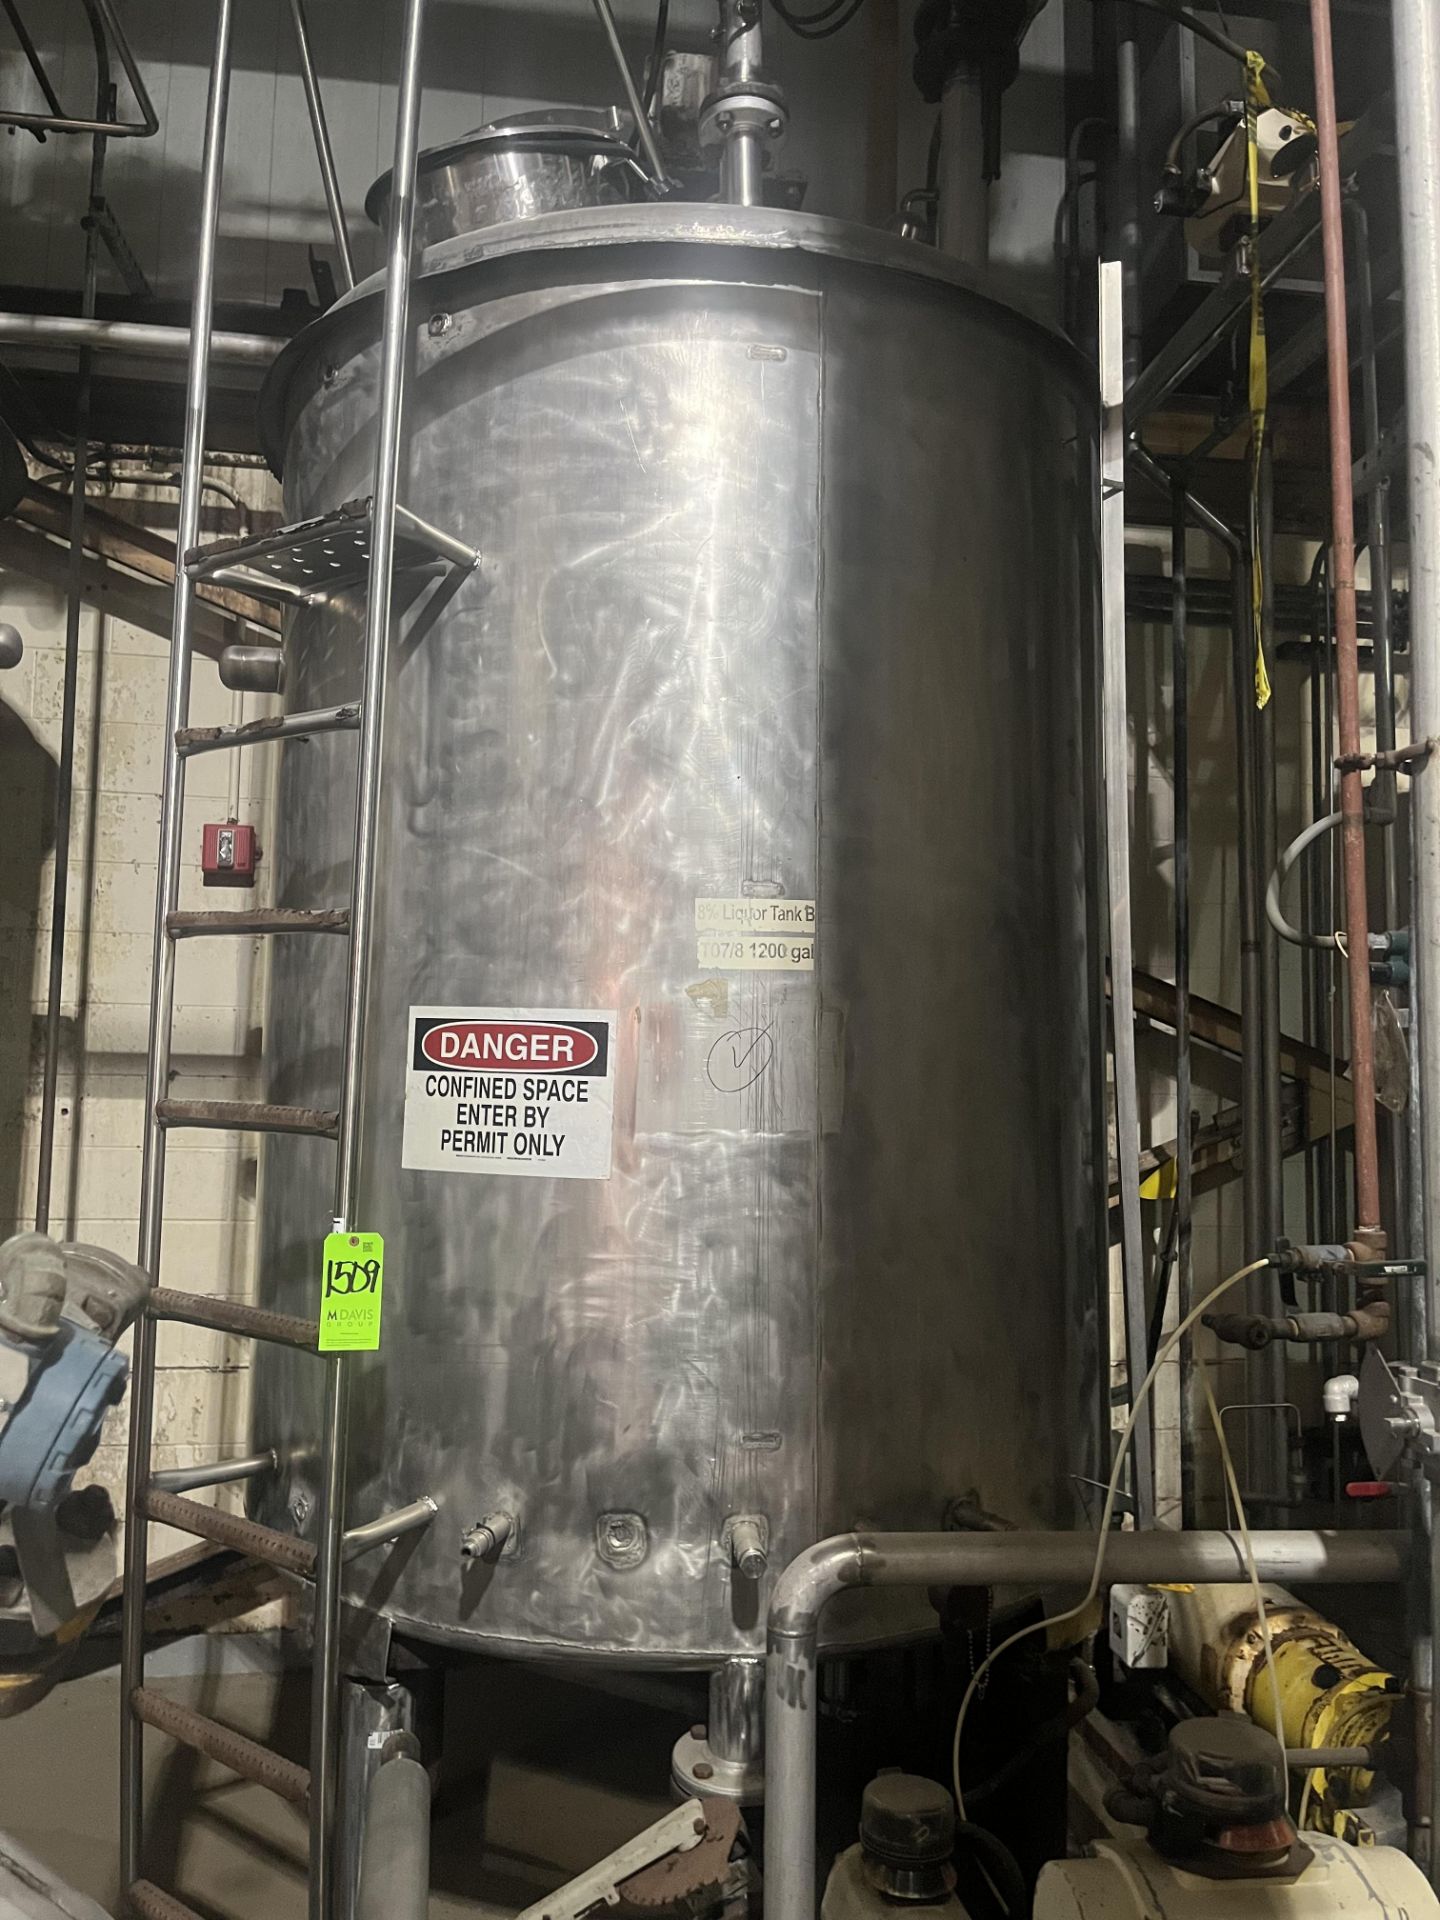 STAINLESS STEEL 1200 GALLON 8% LIQUOR TANK A (Located Freehold, NJ) (Simple Loading Fee $3,520)